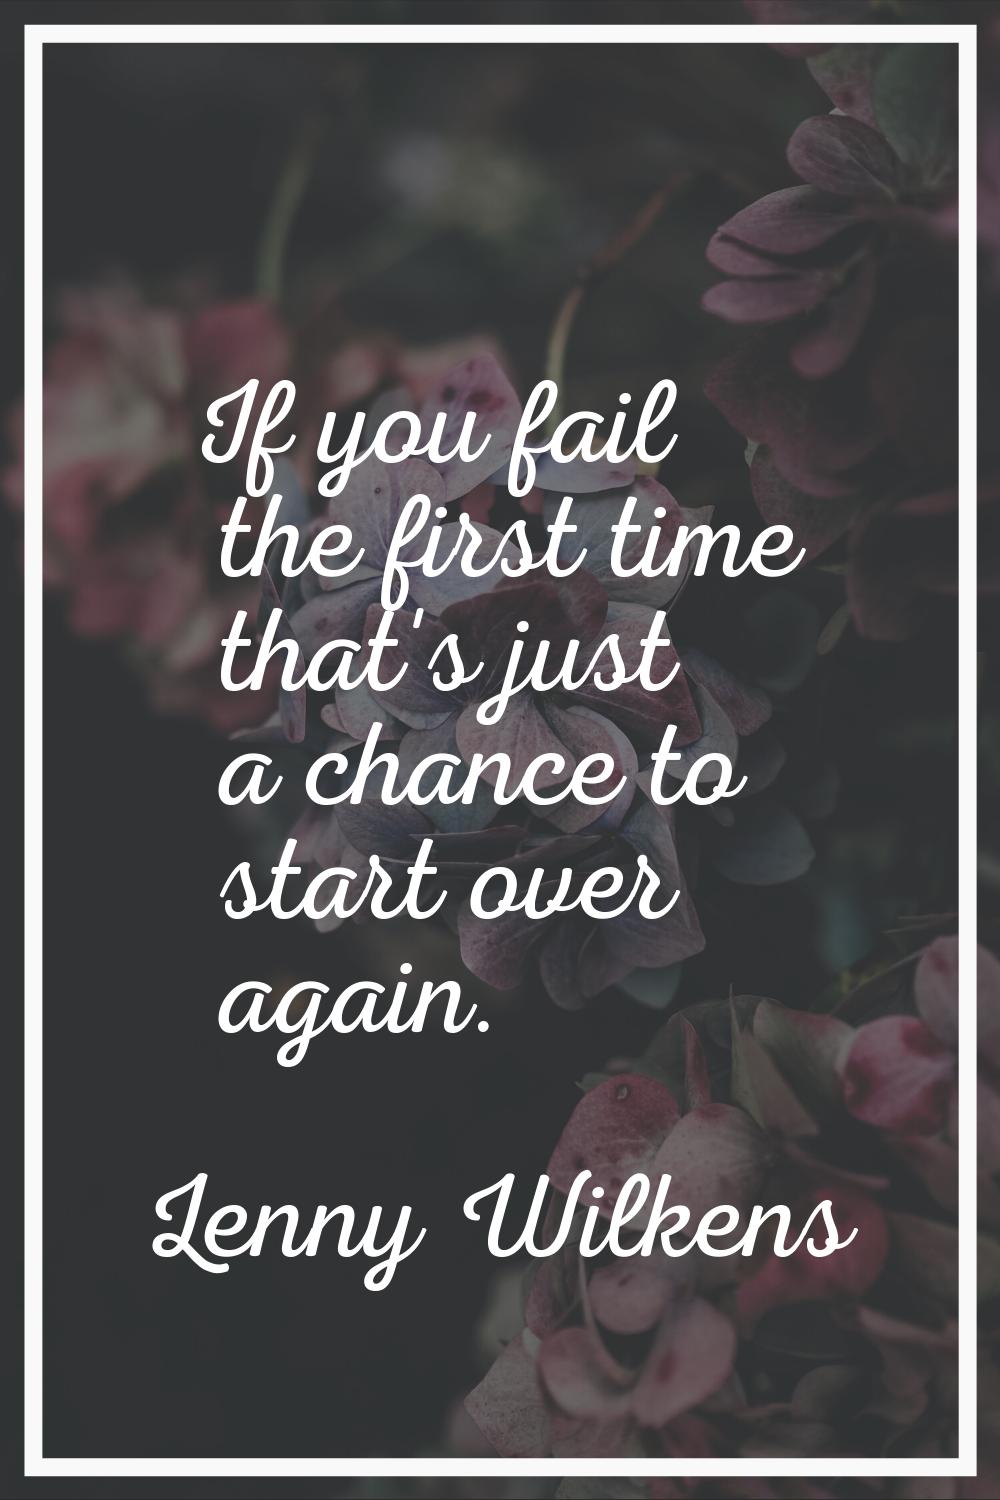 If you fail the first time that's just a chance to start over again.